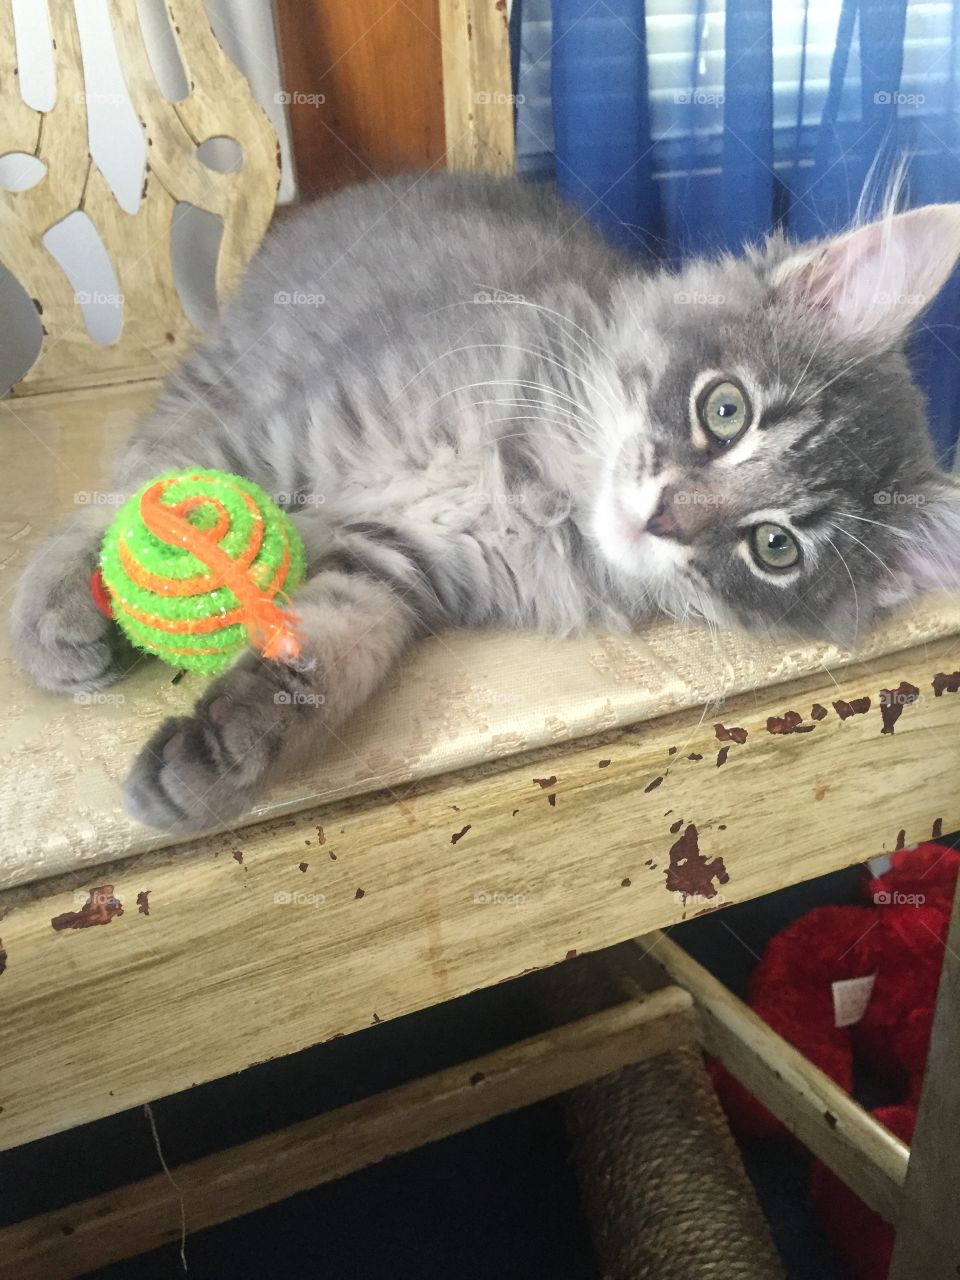 Who wants to play? This little pretty girl kitten is waiting and willing. Play fetch with her